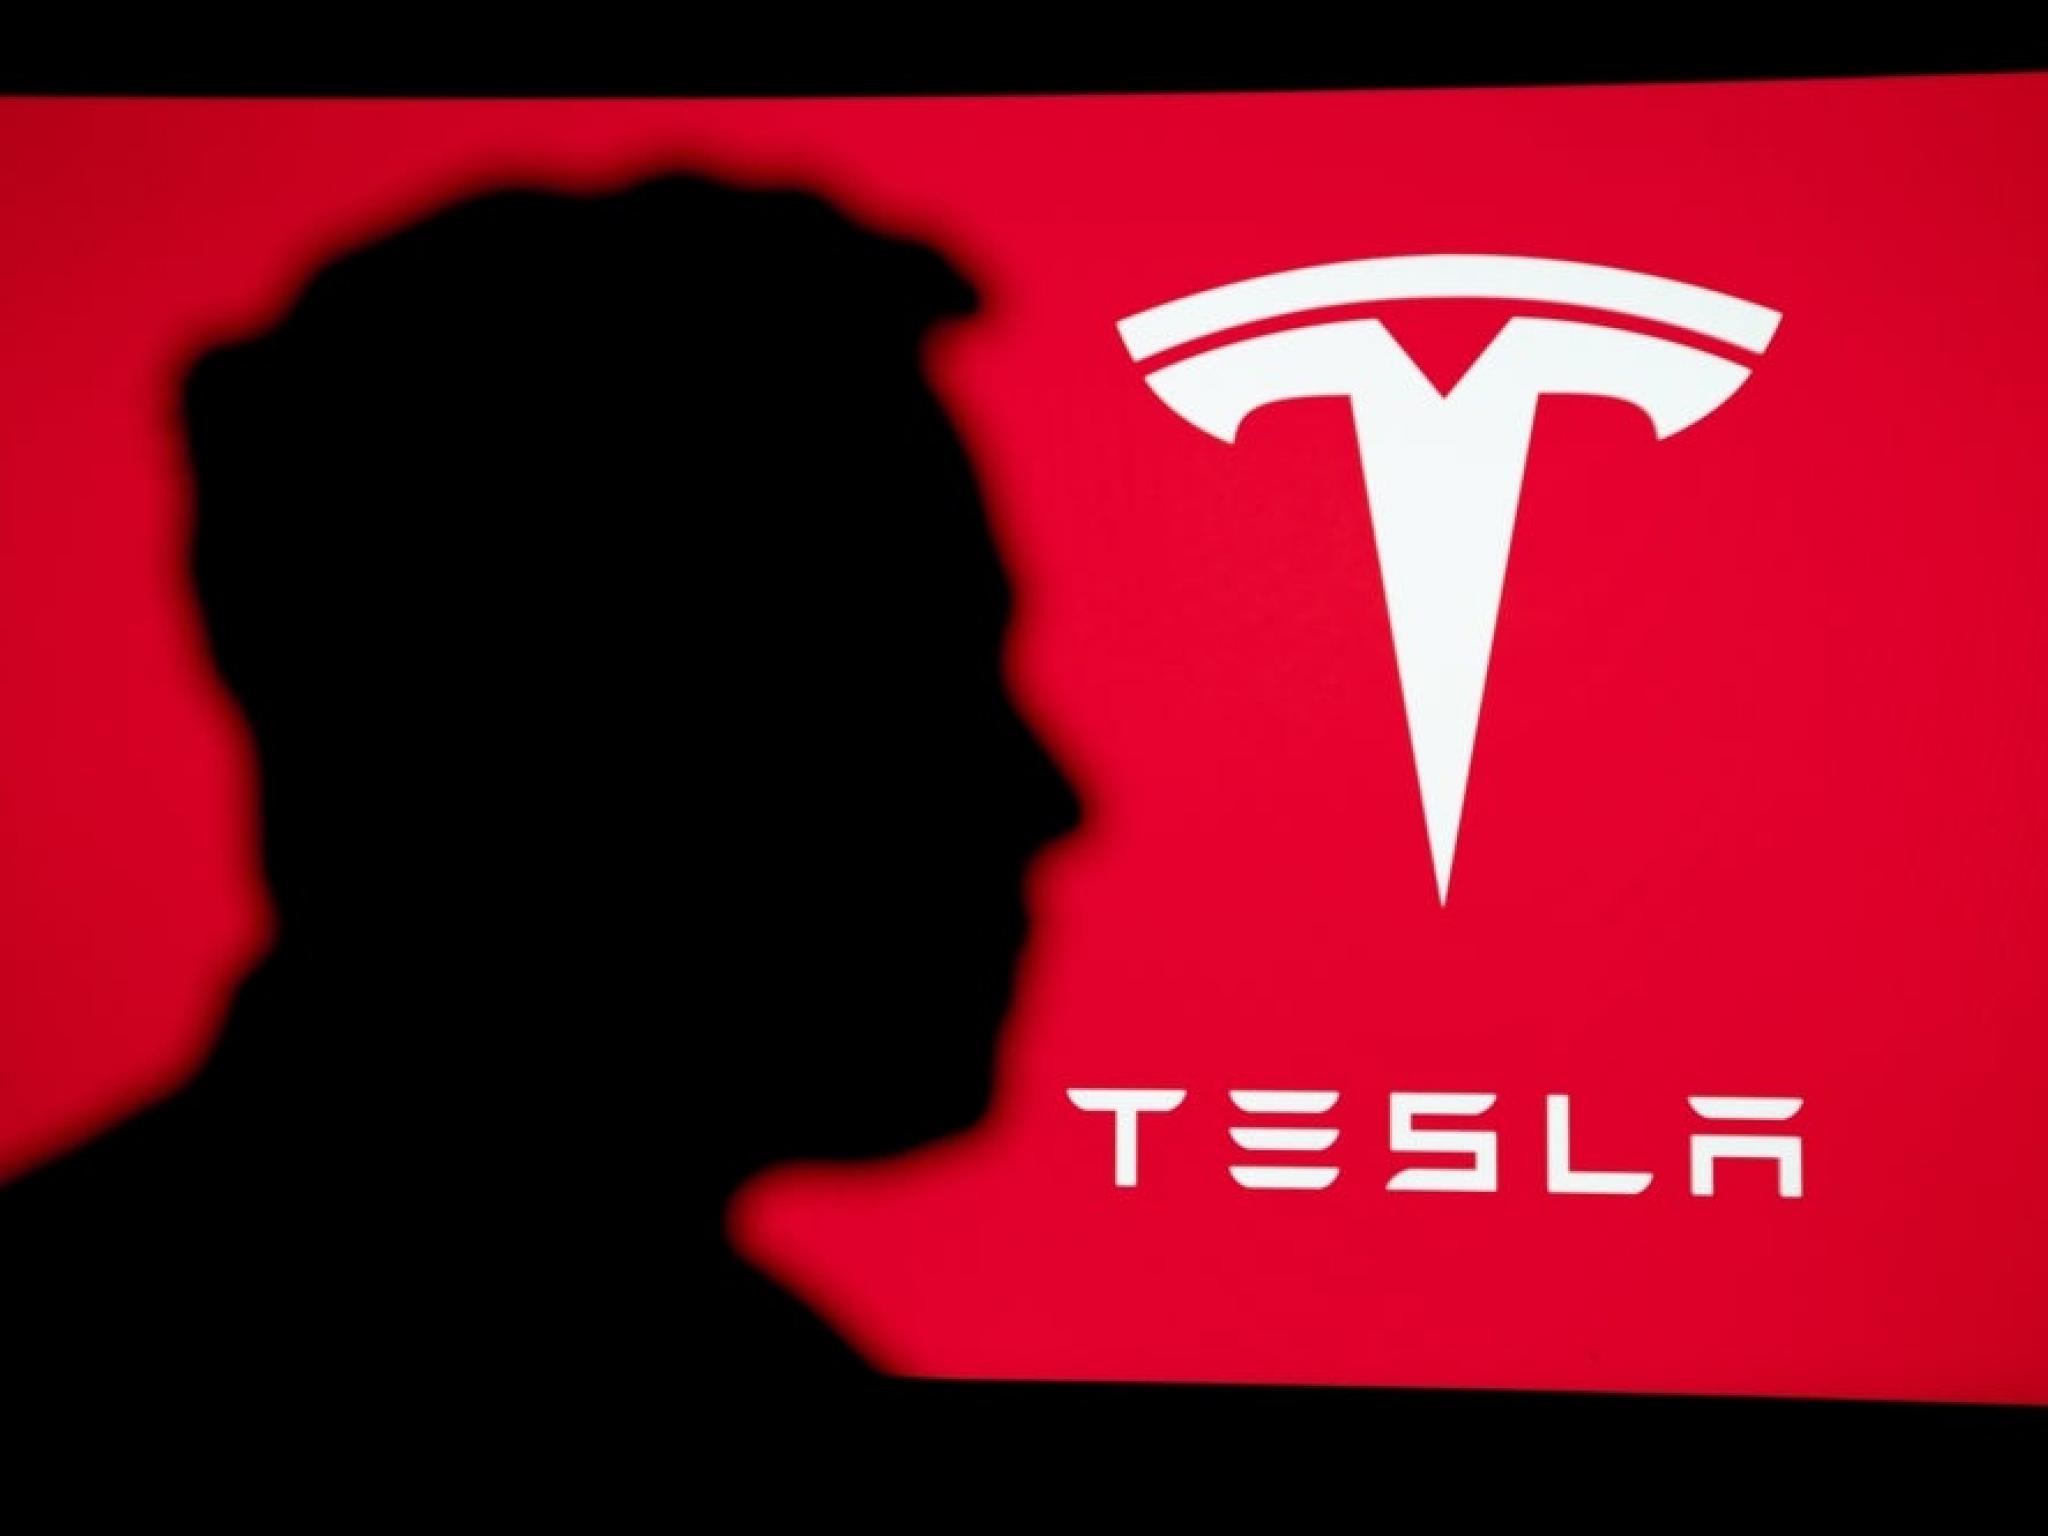  tesla-global-shareholders-risk-exclusion-ahead-of-crucial-vote-amid-cross-border-voting-woes-report 